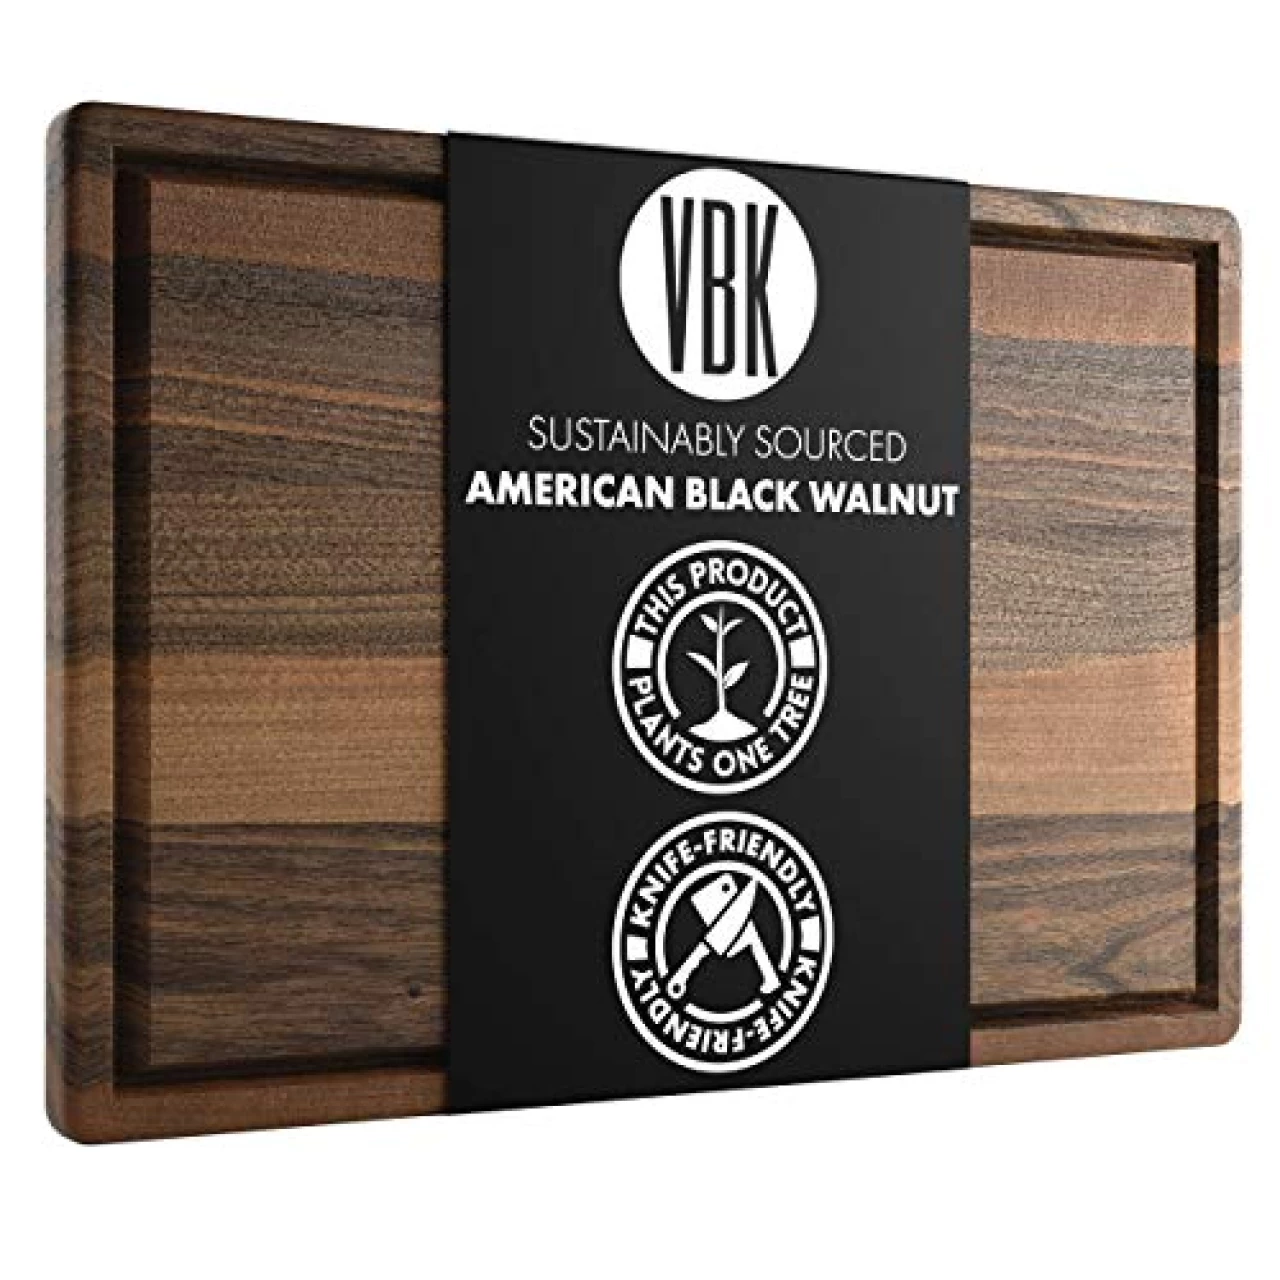 Made in USA Black Walnut Wood Cutting Board by Virginia Boys Kitchens - Butcher Block Wooden Carving Board with Juice Well (17x11)